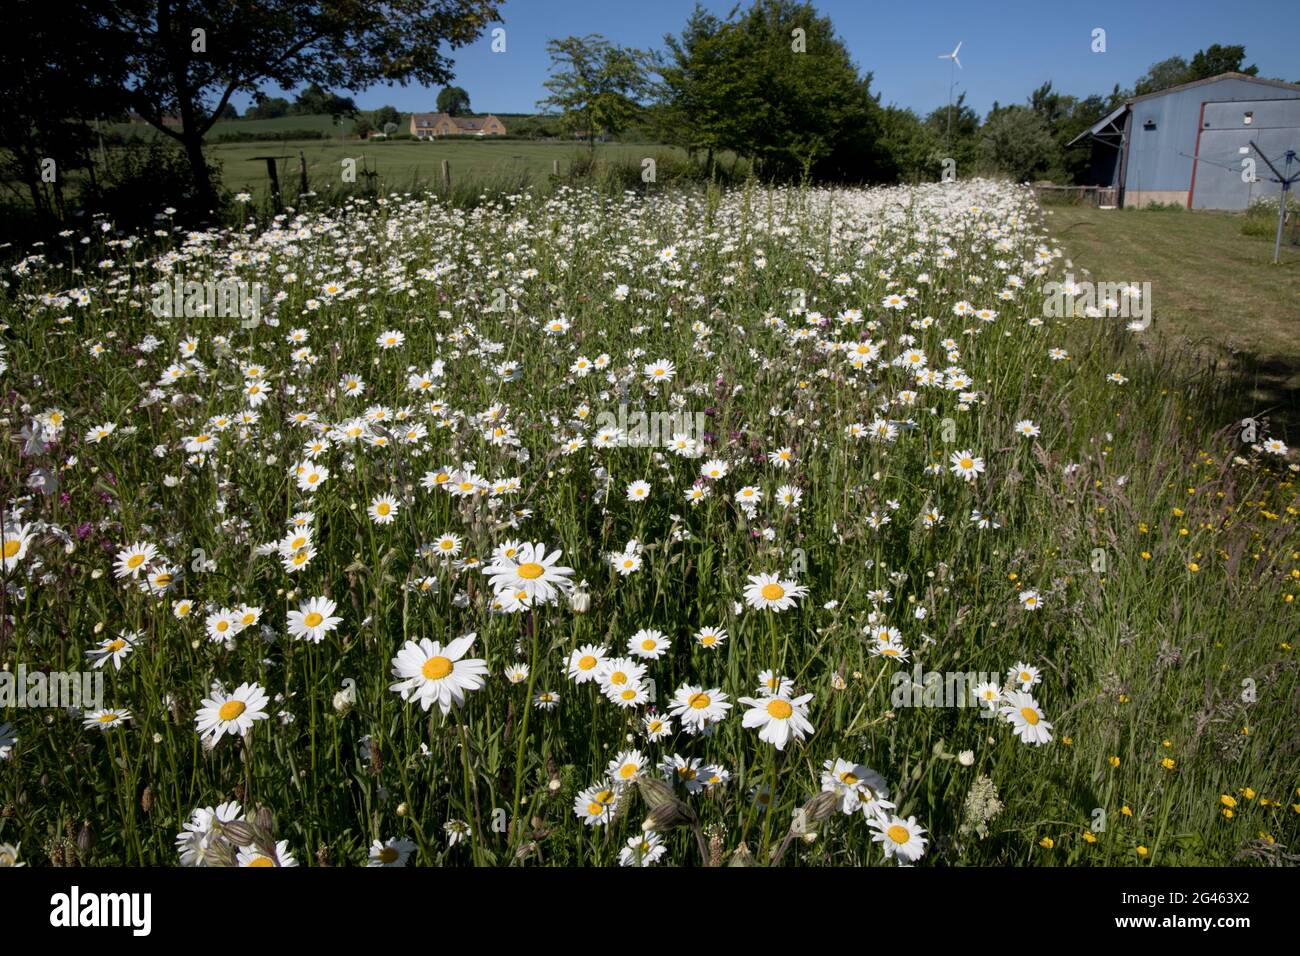 Native UK wildflowers in full bloom in 400 sq m of rewilded area. in large Cotswold garden just 13 months after removing turf and scattering seeds. Stock Photo